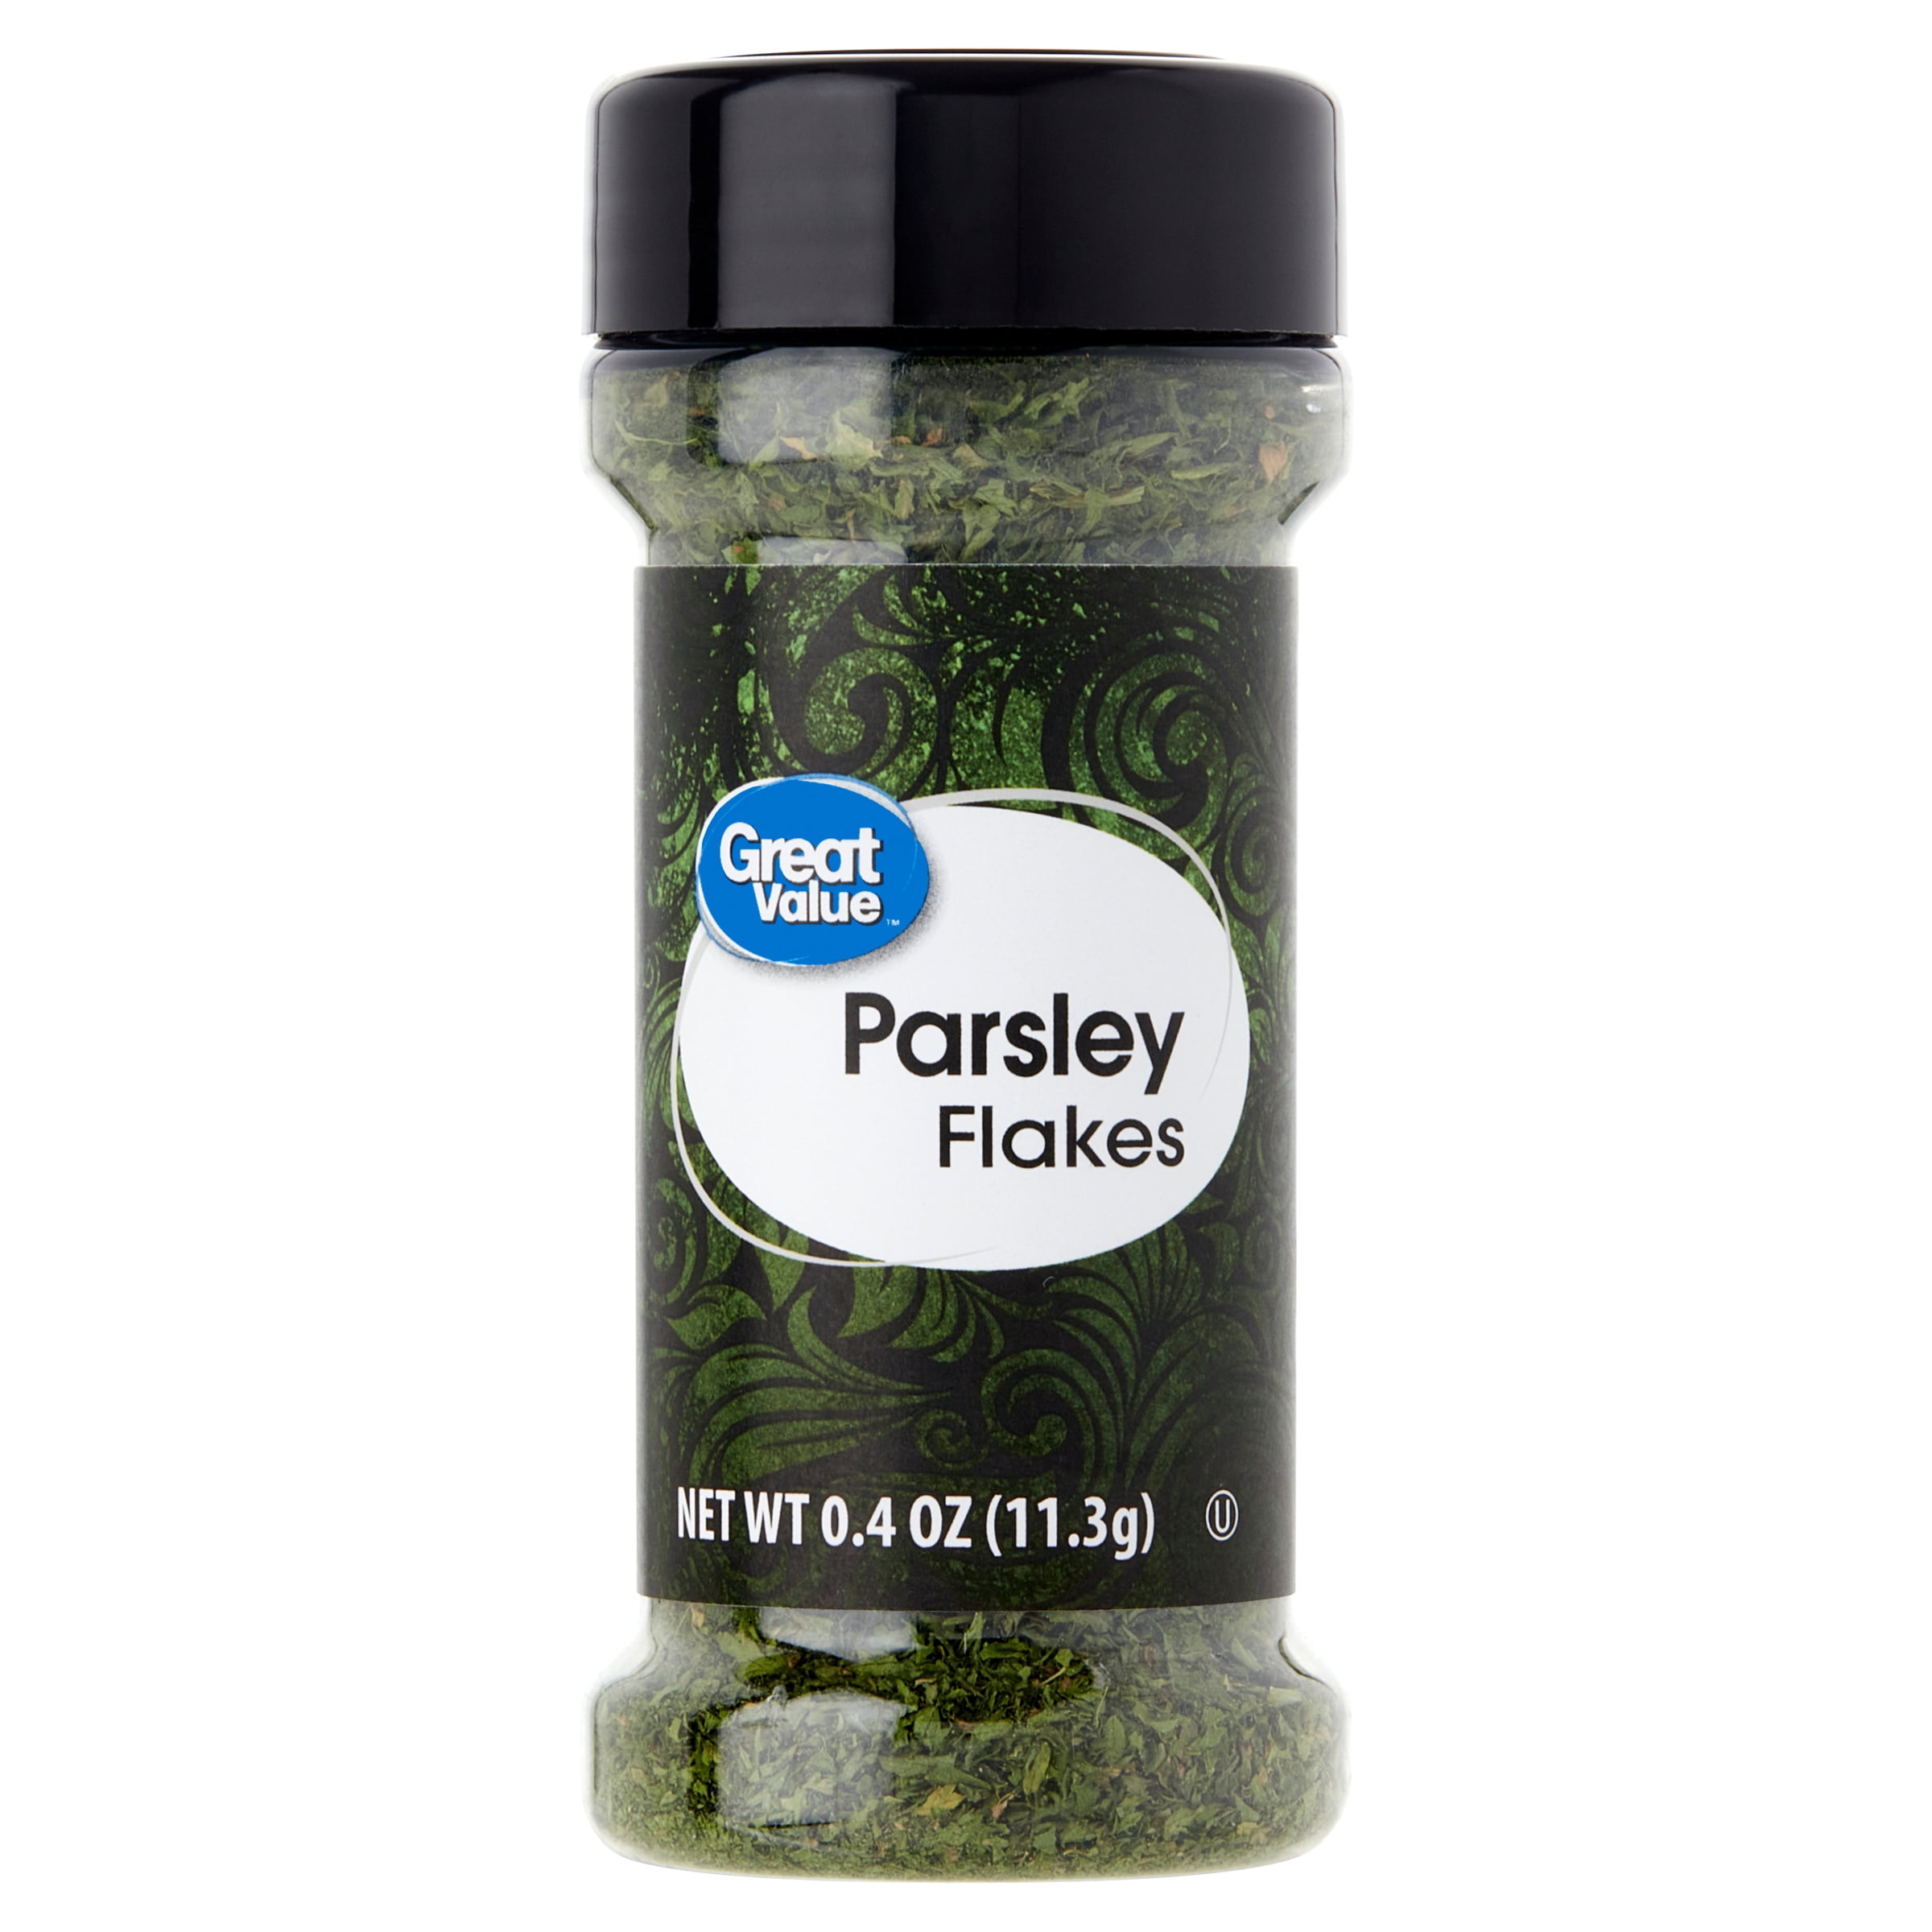 Great Value Parsley Flakes, 0.4 Oz